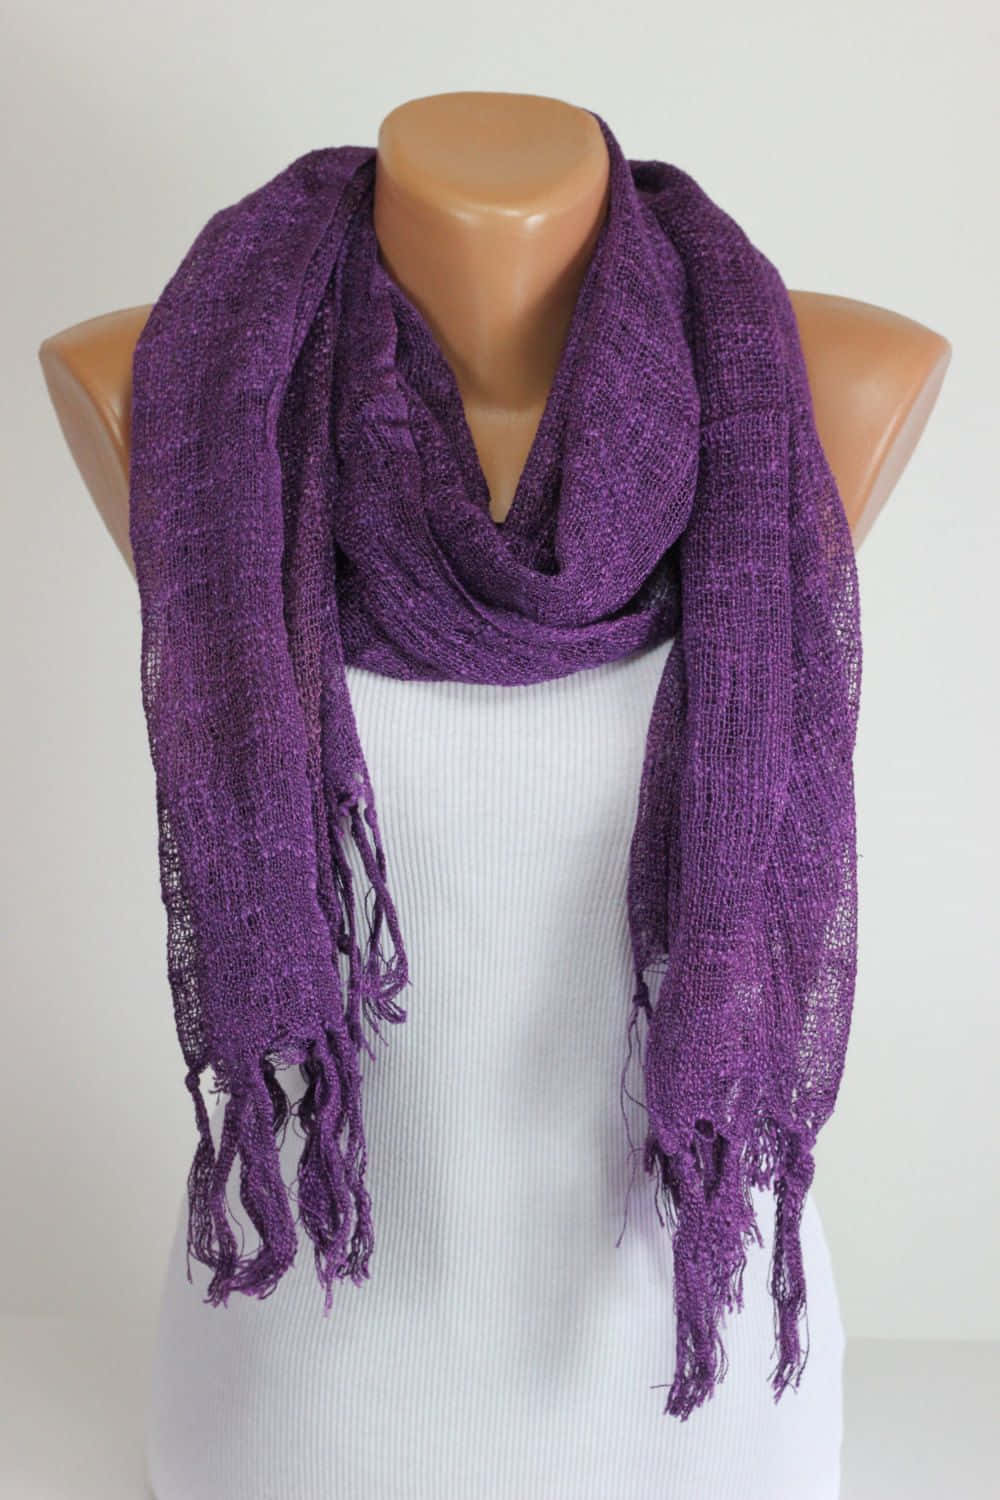 Soft Purple Scarf - Style Your Fall Look Wallpaper